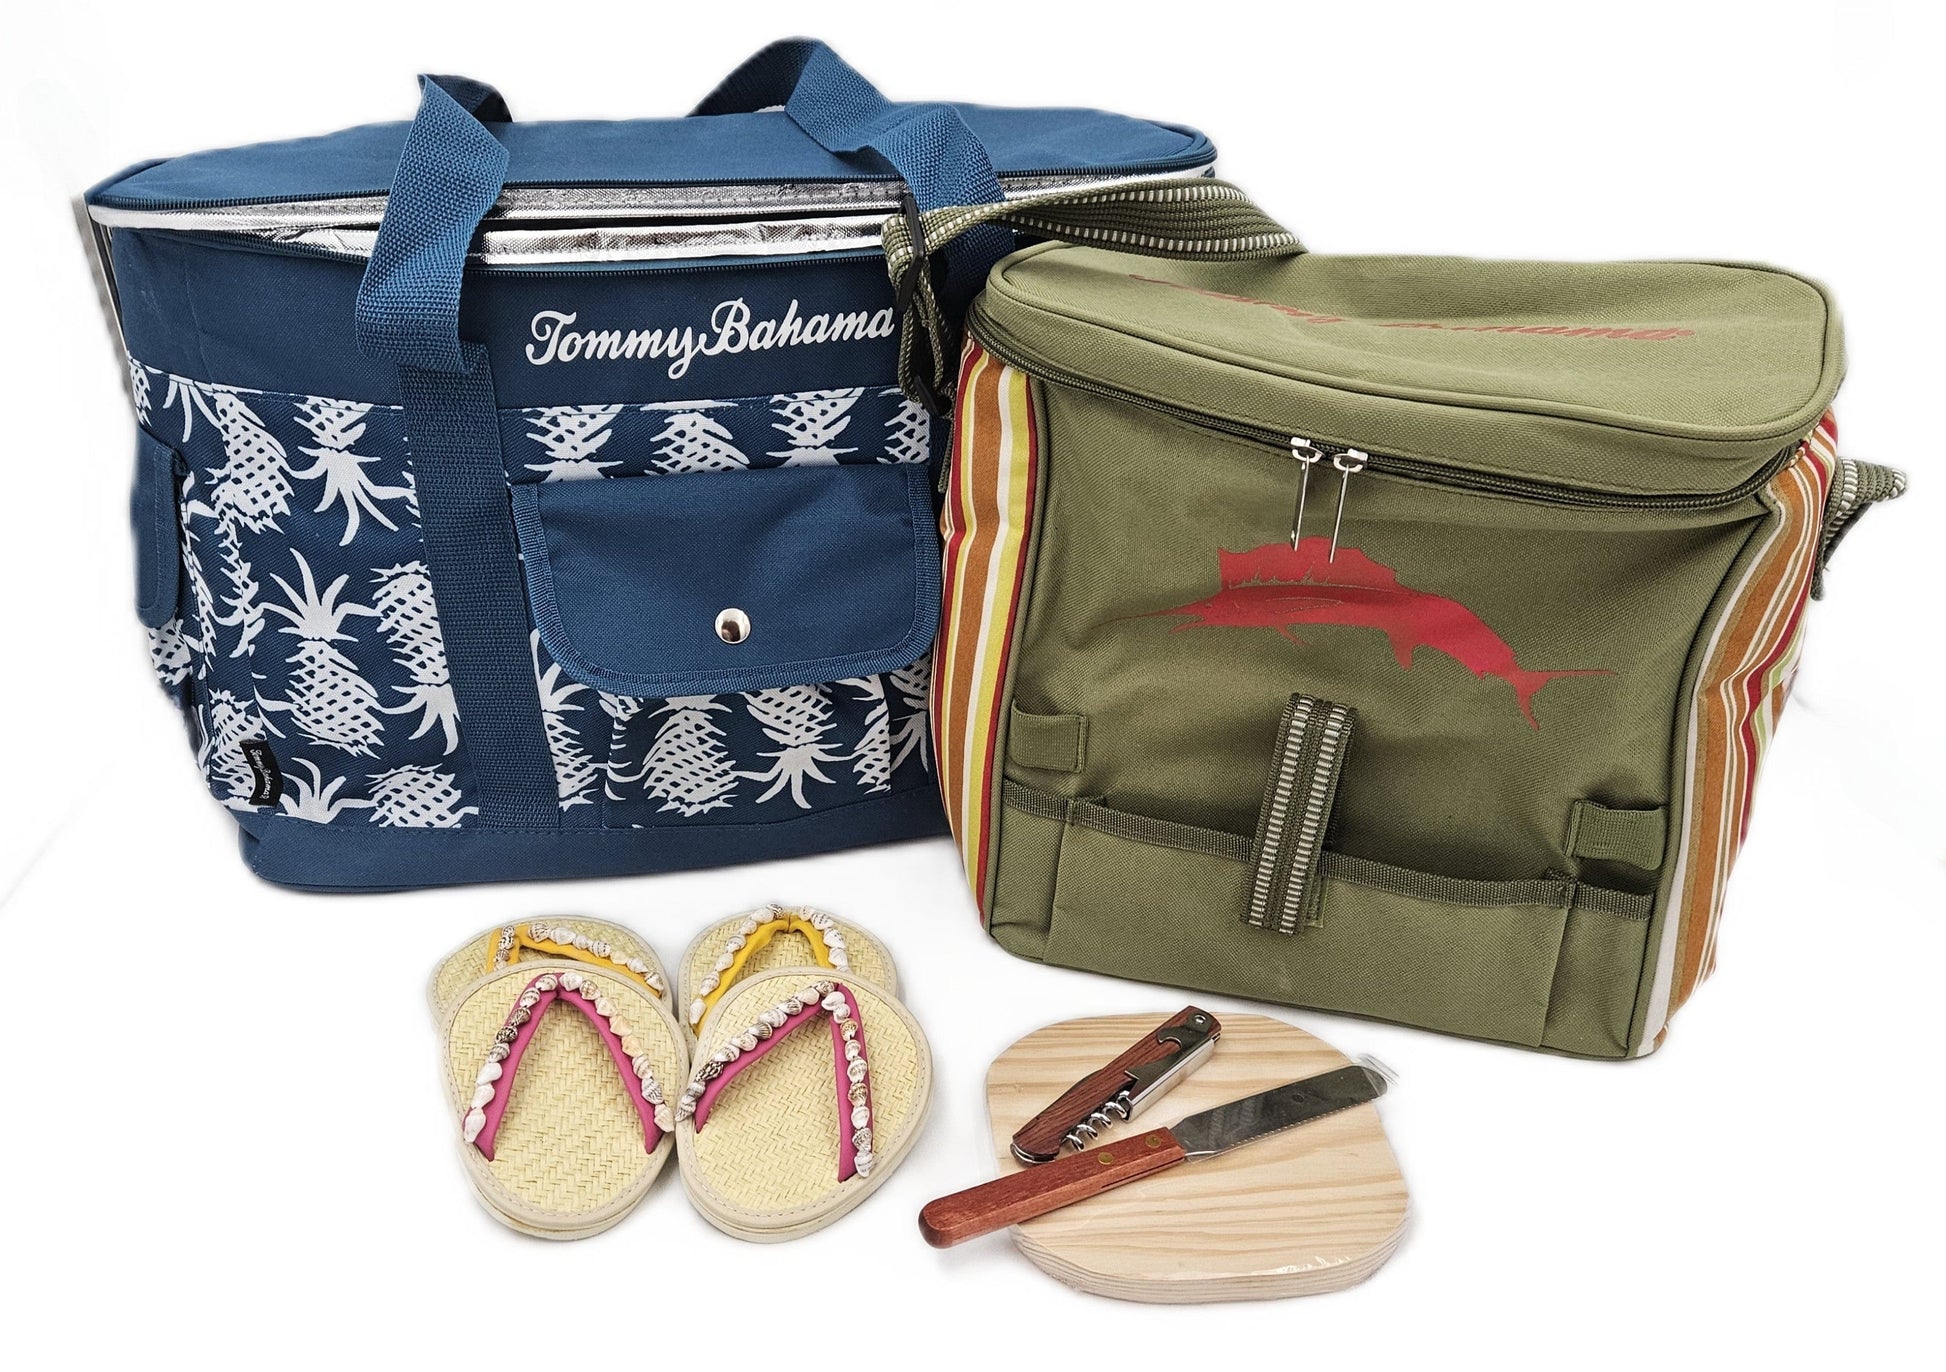 Tommy Bahama Barware NOS Tommy Bahama Cooler Bag - Cheese & Wine Carry Bag - Glassware & More